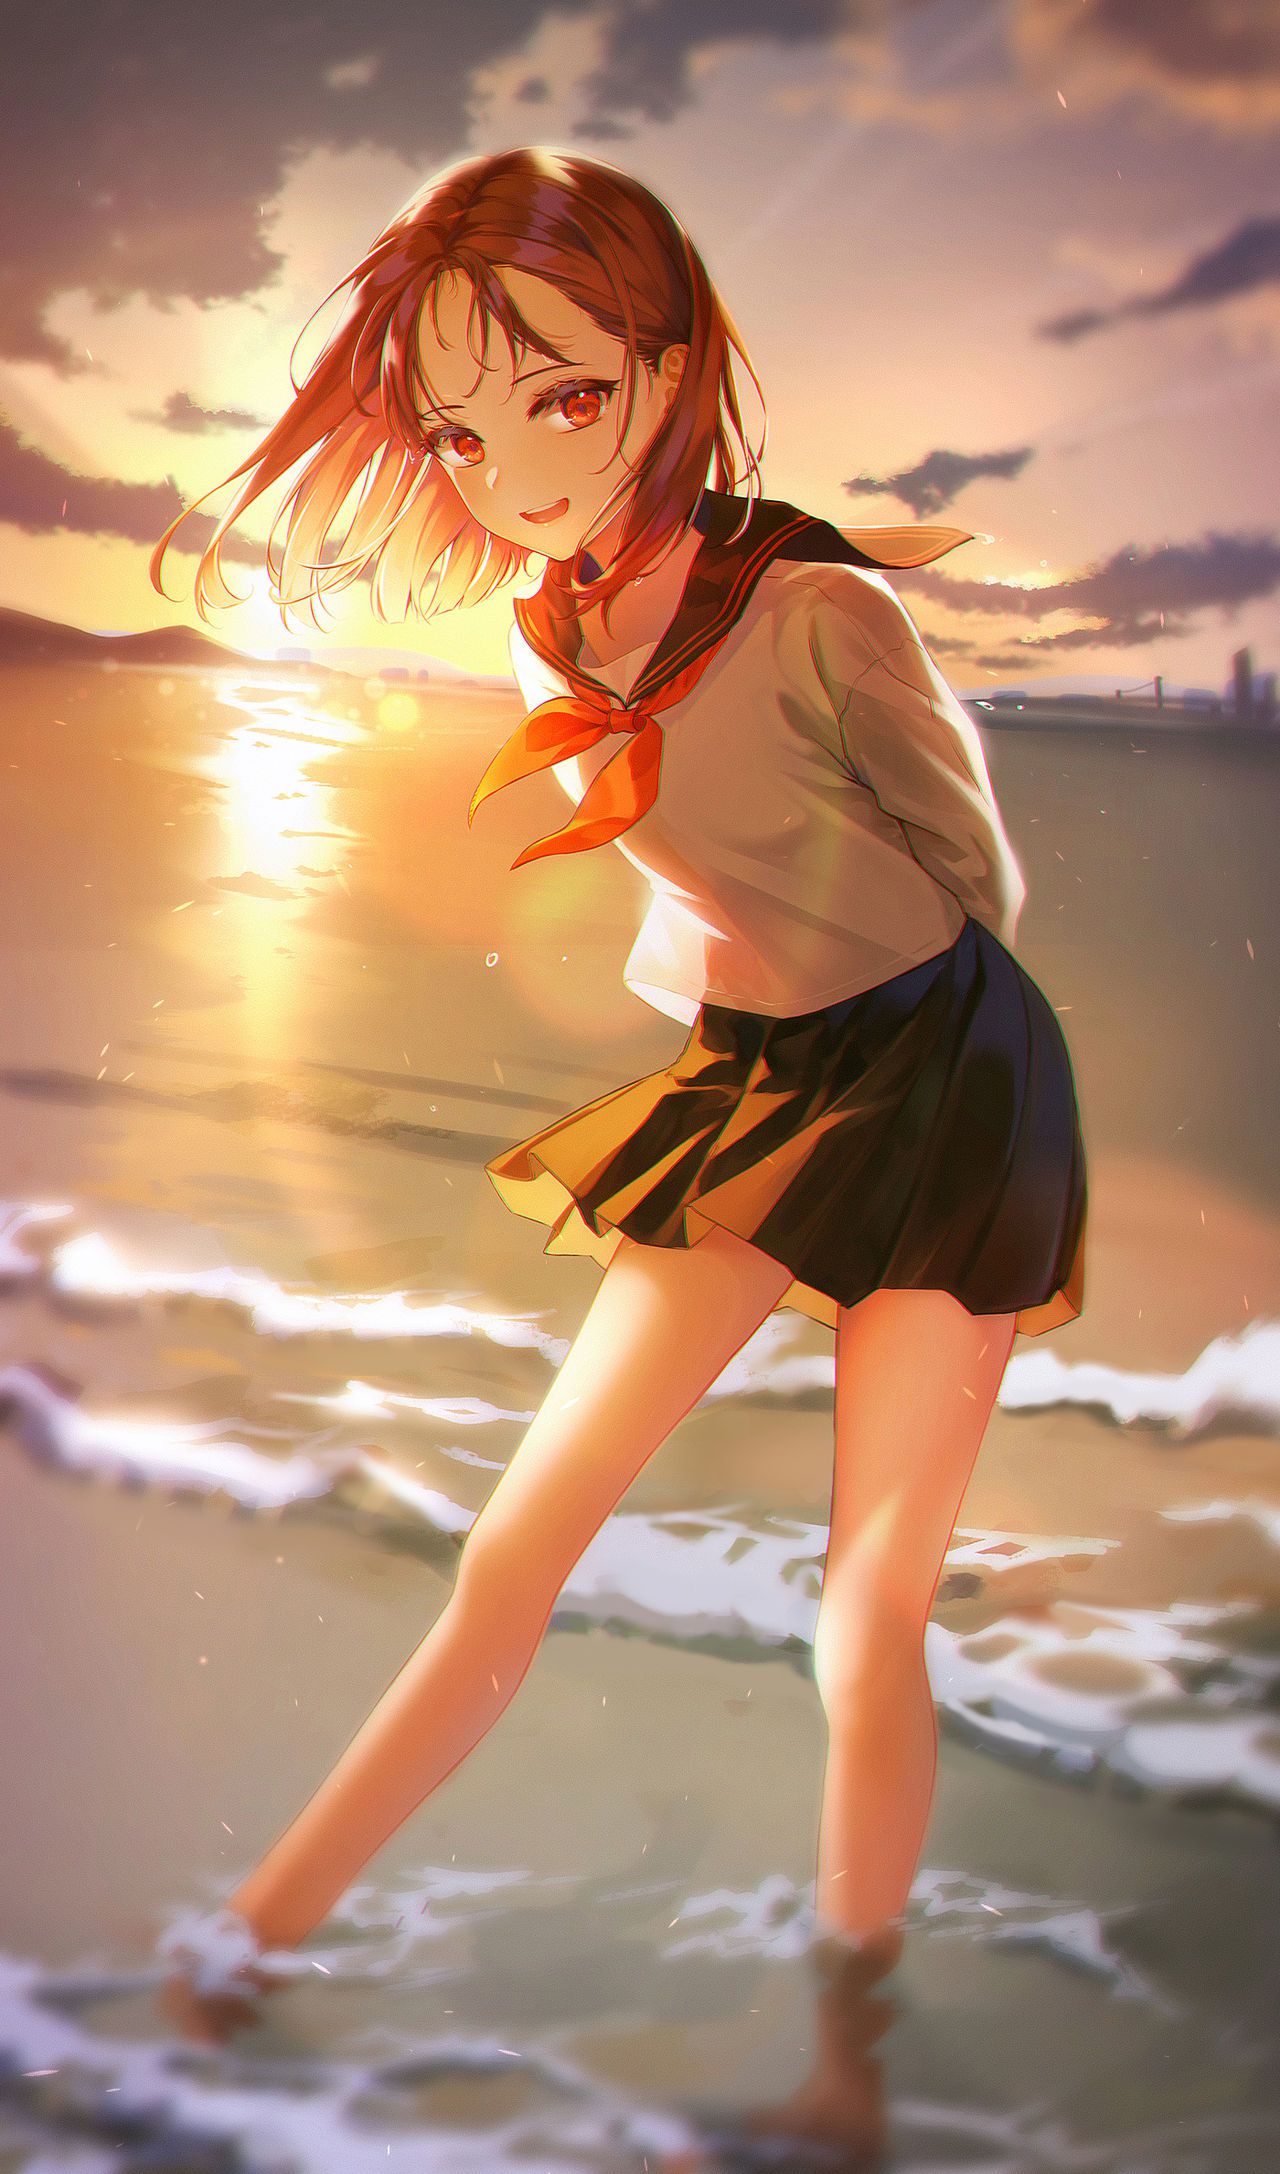 Girls And The Sea 少女与海 159